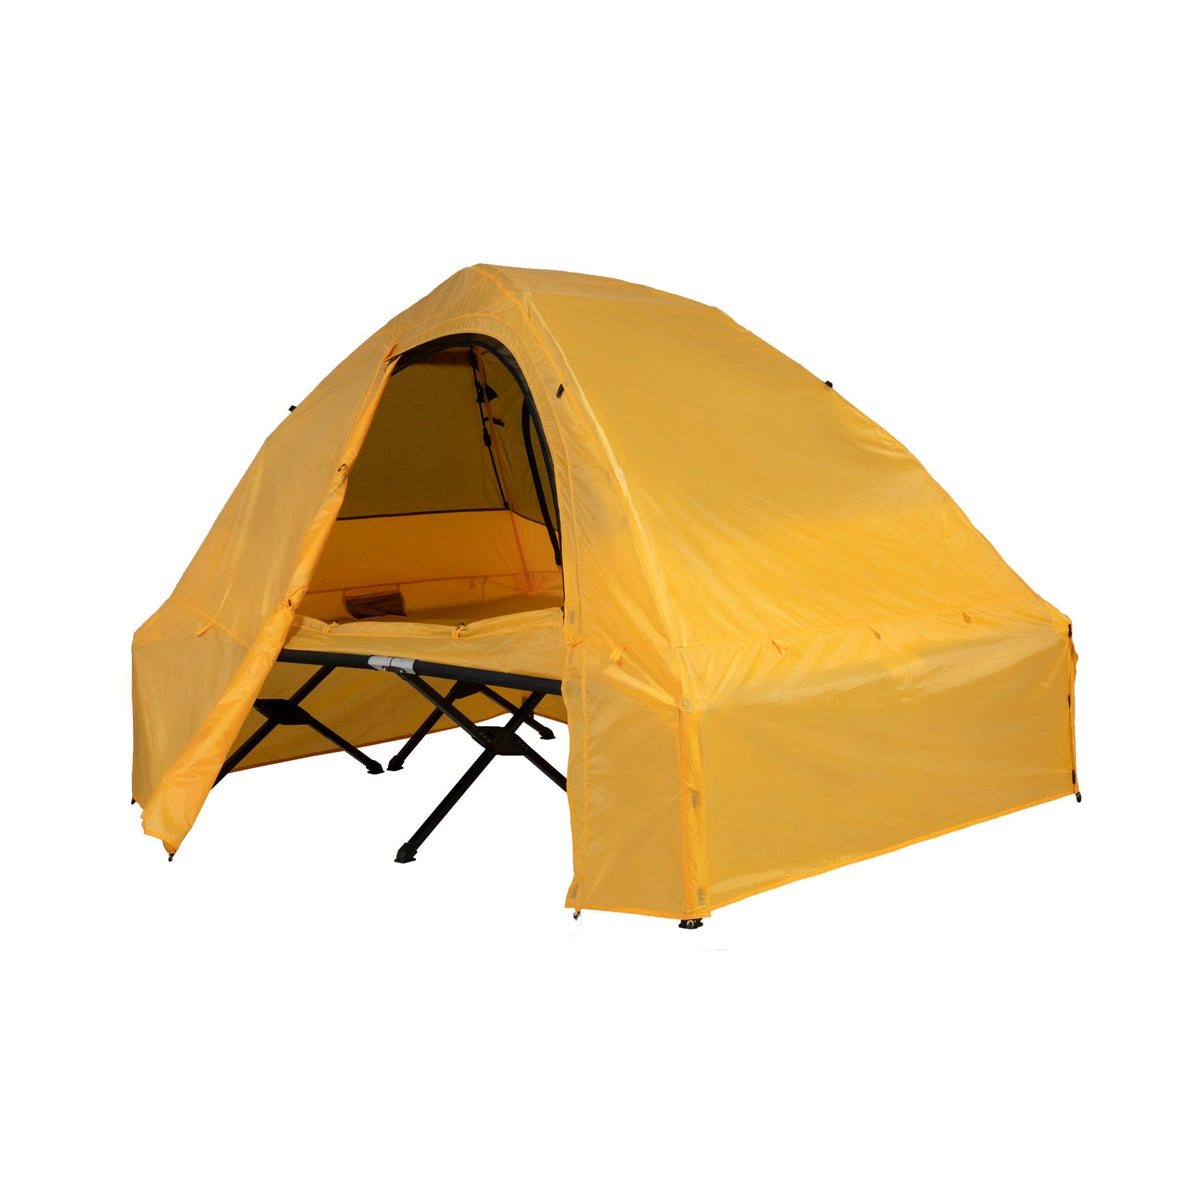 TETON Sports Vista 2 Elite Extended Length Rainfly Tent & Cot Cover Yellow 2004YL